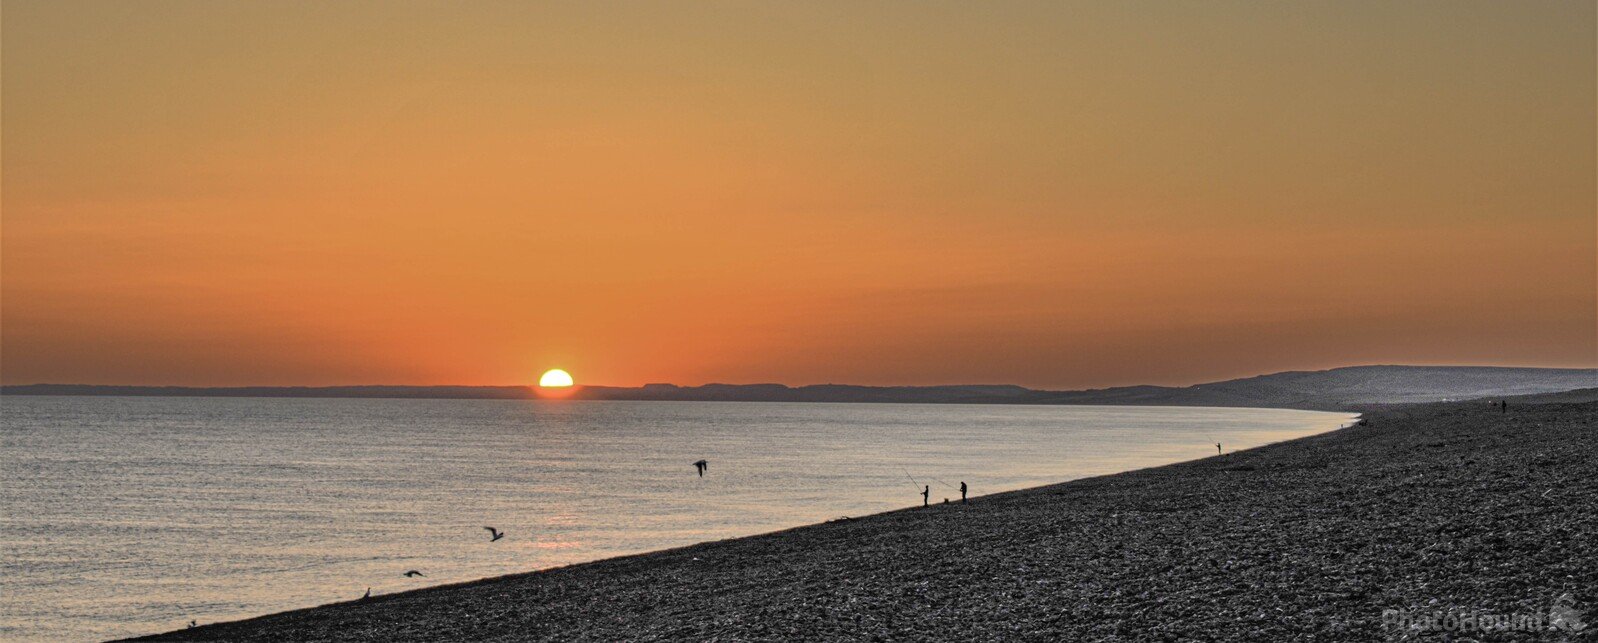 Image of Chesil Beach by michael bennett